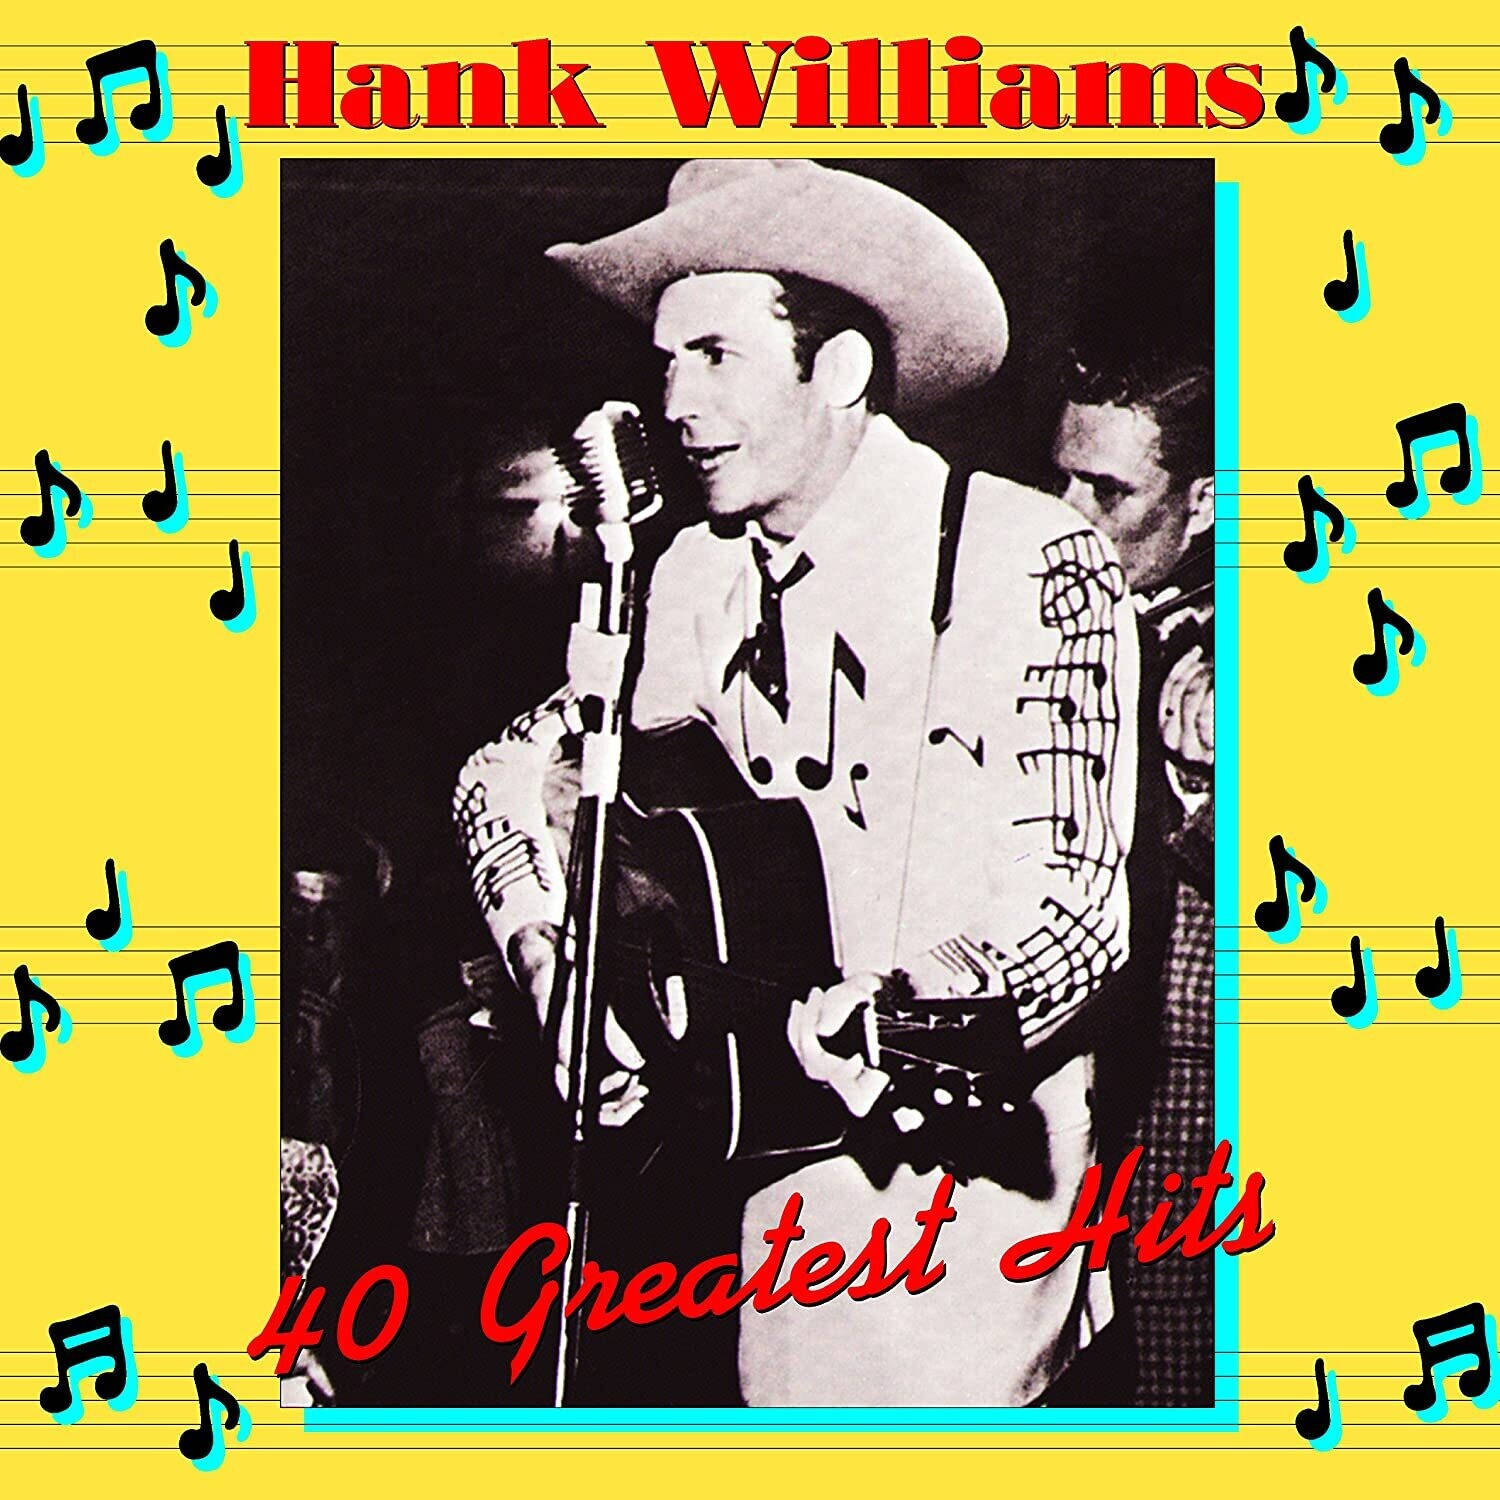 40 Greatest Hits By Hank Williams Wallpaper